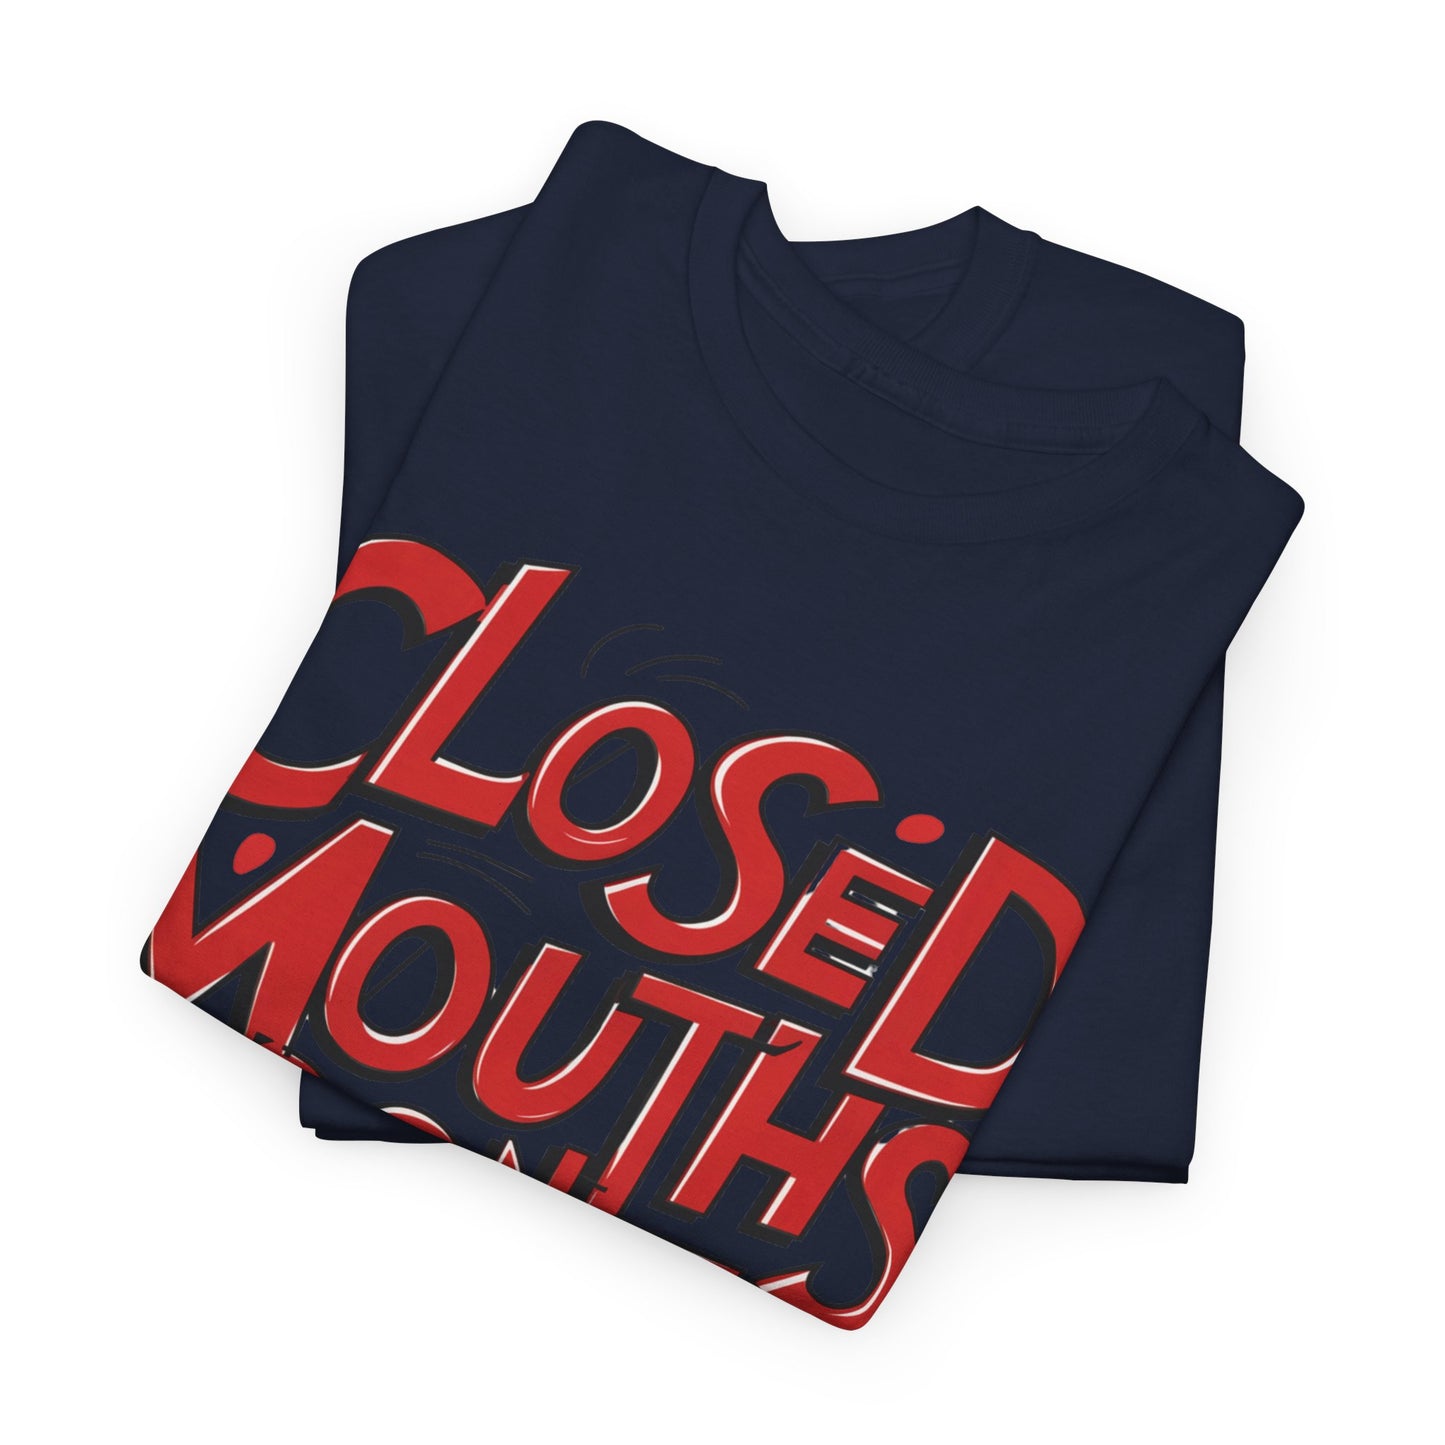 "Closed Mouths Don't Get Fed" -- T-shirt